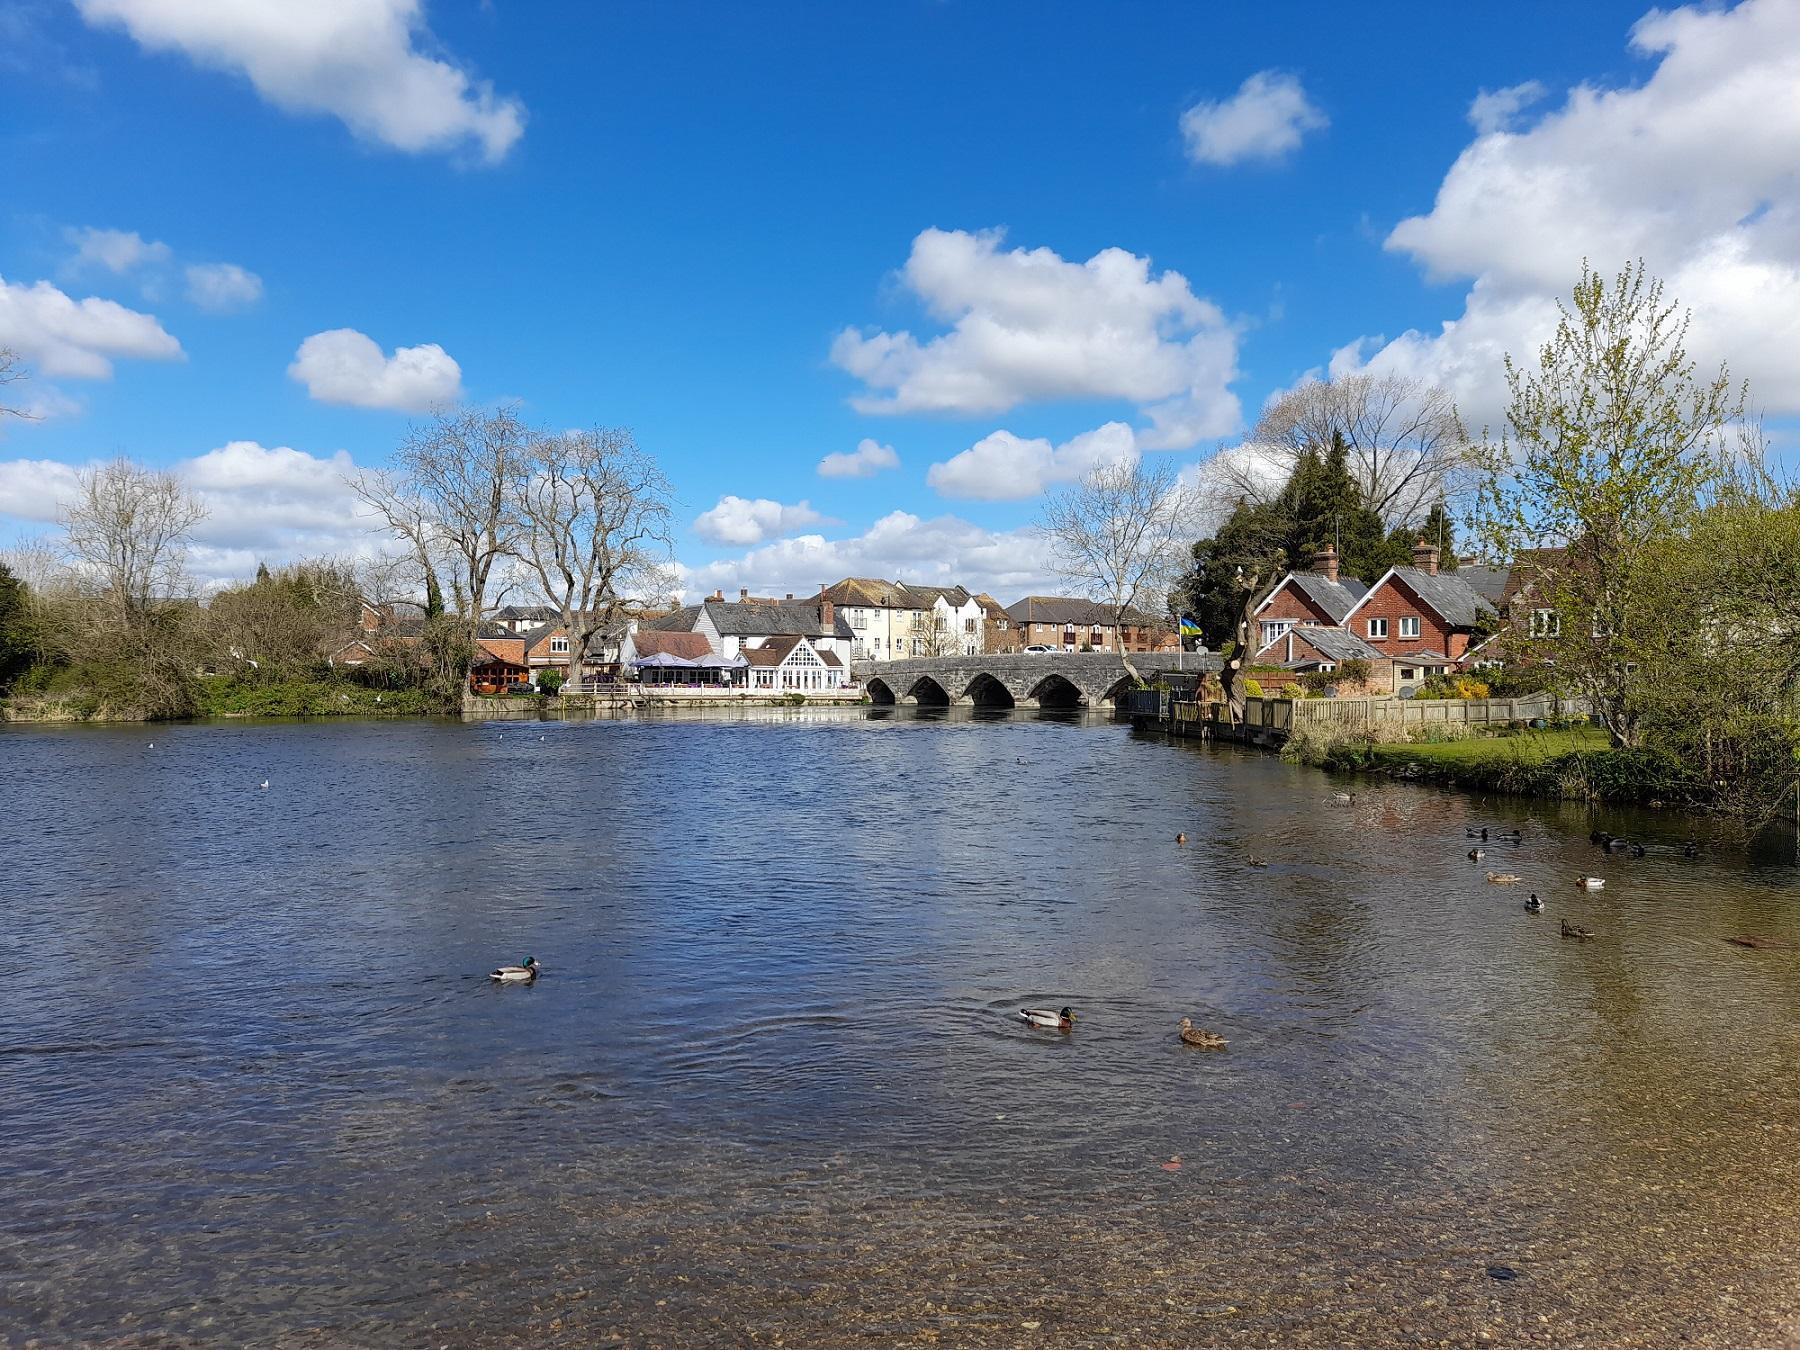 An old bridge in a New Forest town in the background with a wide river in the foreground containing ducks under a blue sky with some white clouds